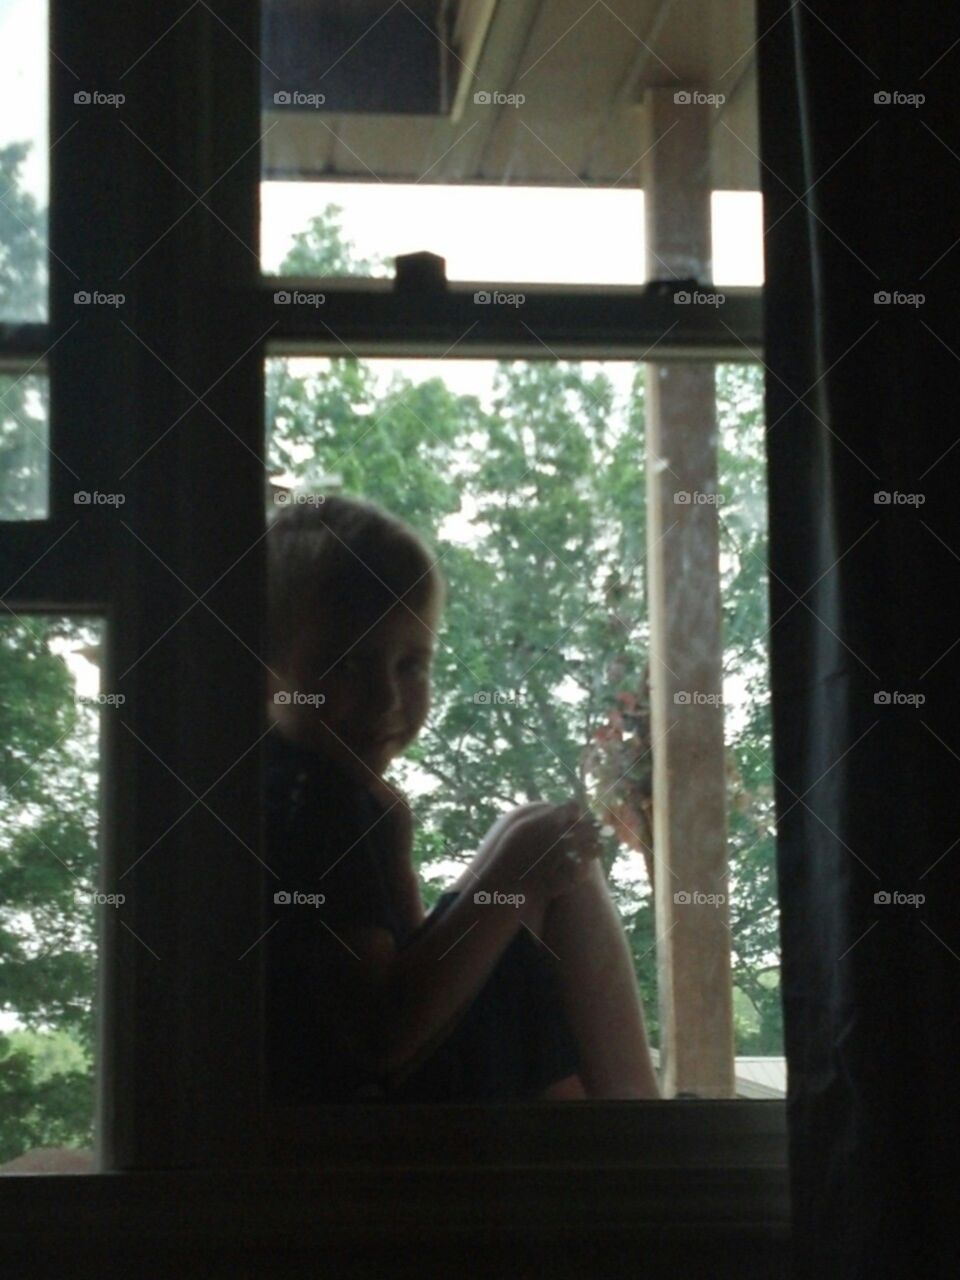 picture perfect portrait. my 6 year old son climbs in window waiting on me to cone out and play